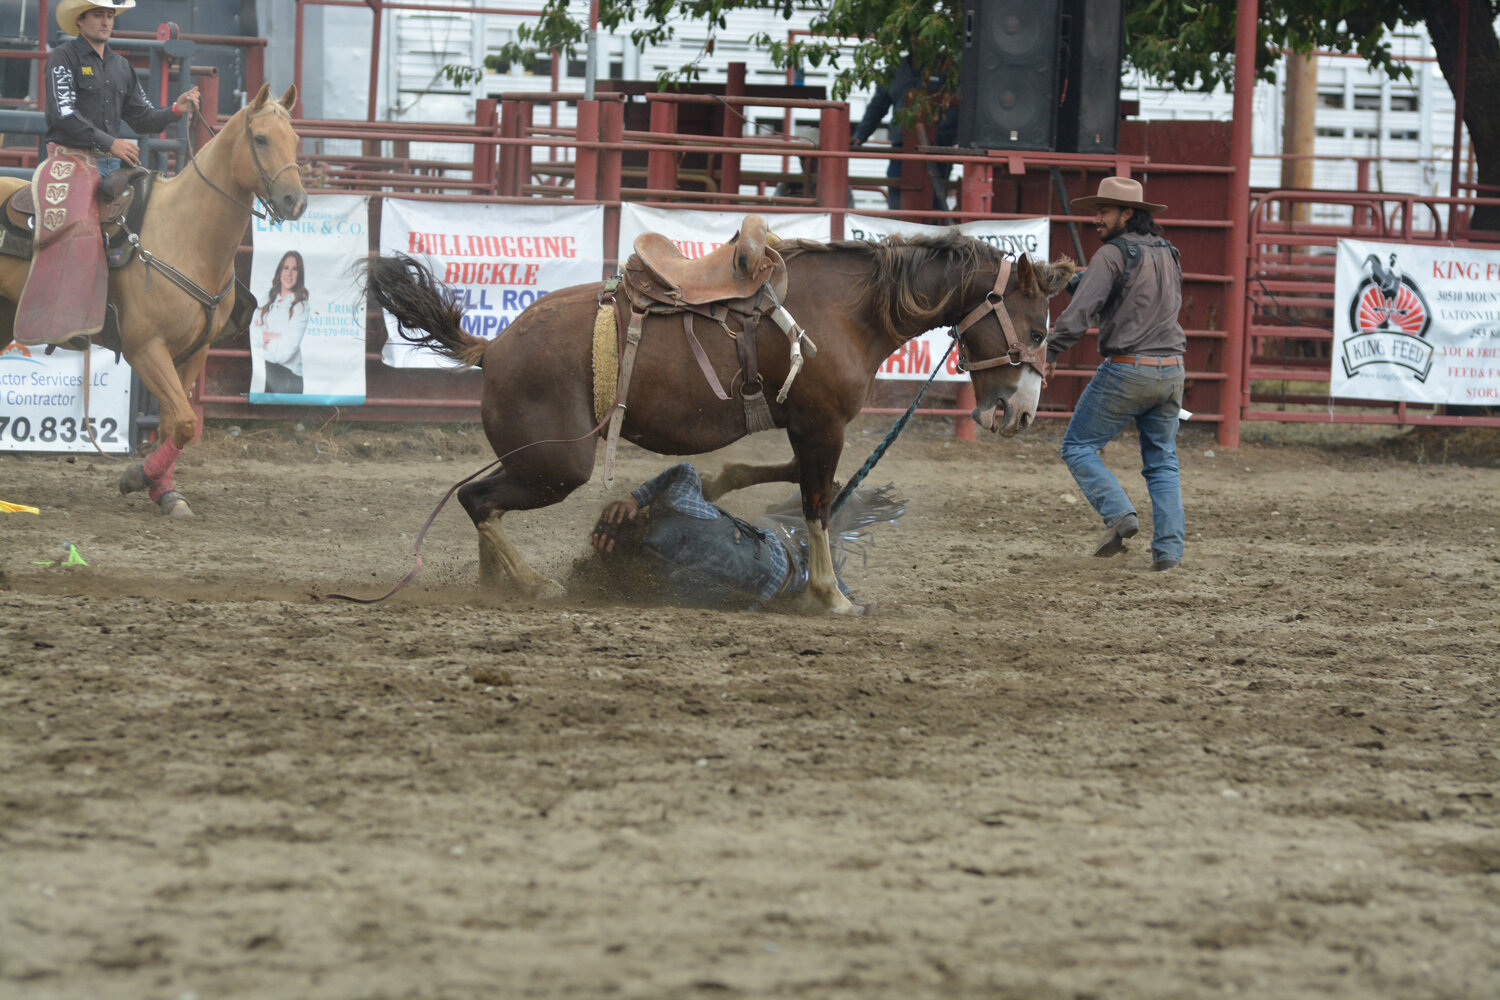 A cowboy ducks for cover after he was bucked off his horse and nearly trampled.